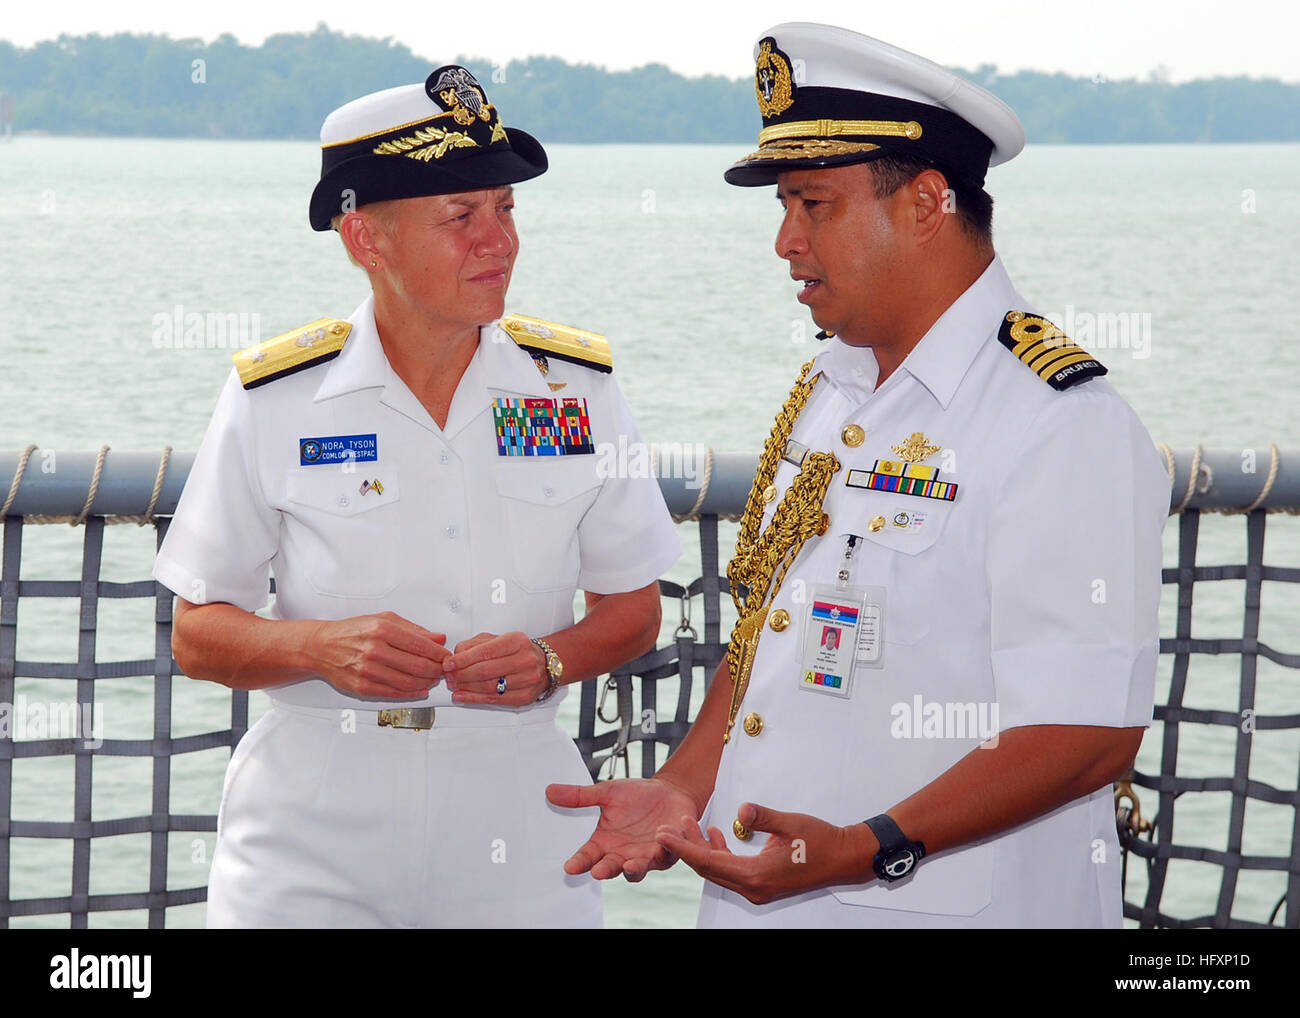 090804-N-5207L-040  MUARA, Brunei (Aug. 4, 2009) Rear Adm. Nora Tyson, commander of Logistics Group Western Pacific, listens to Col. Haji Abdul Halim bin Haji Mohd Hanifah, commander of the Royal Brunei Navy, before the opening ceremony for Cooperation Afloat Readiness and Training (CARAT) Brunei 2009. CARAT is a series of bilateral exercises held annually in Southeast Asia to strengthen relationships and enhance the operational readiness of the participating forces. (U.S. Navy photo by Mass Communication Specialist 1st Class Bill Larned/Released) US Navy 090804-N-5207L-040 Rear Adm. Nora Tyso Stock Photo